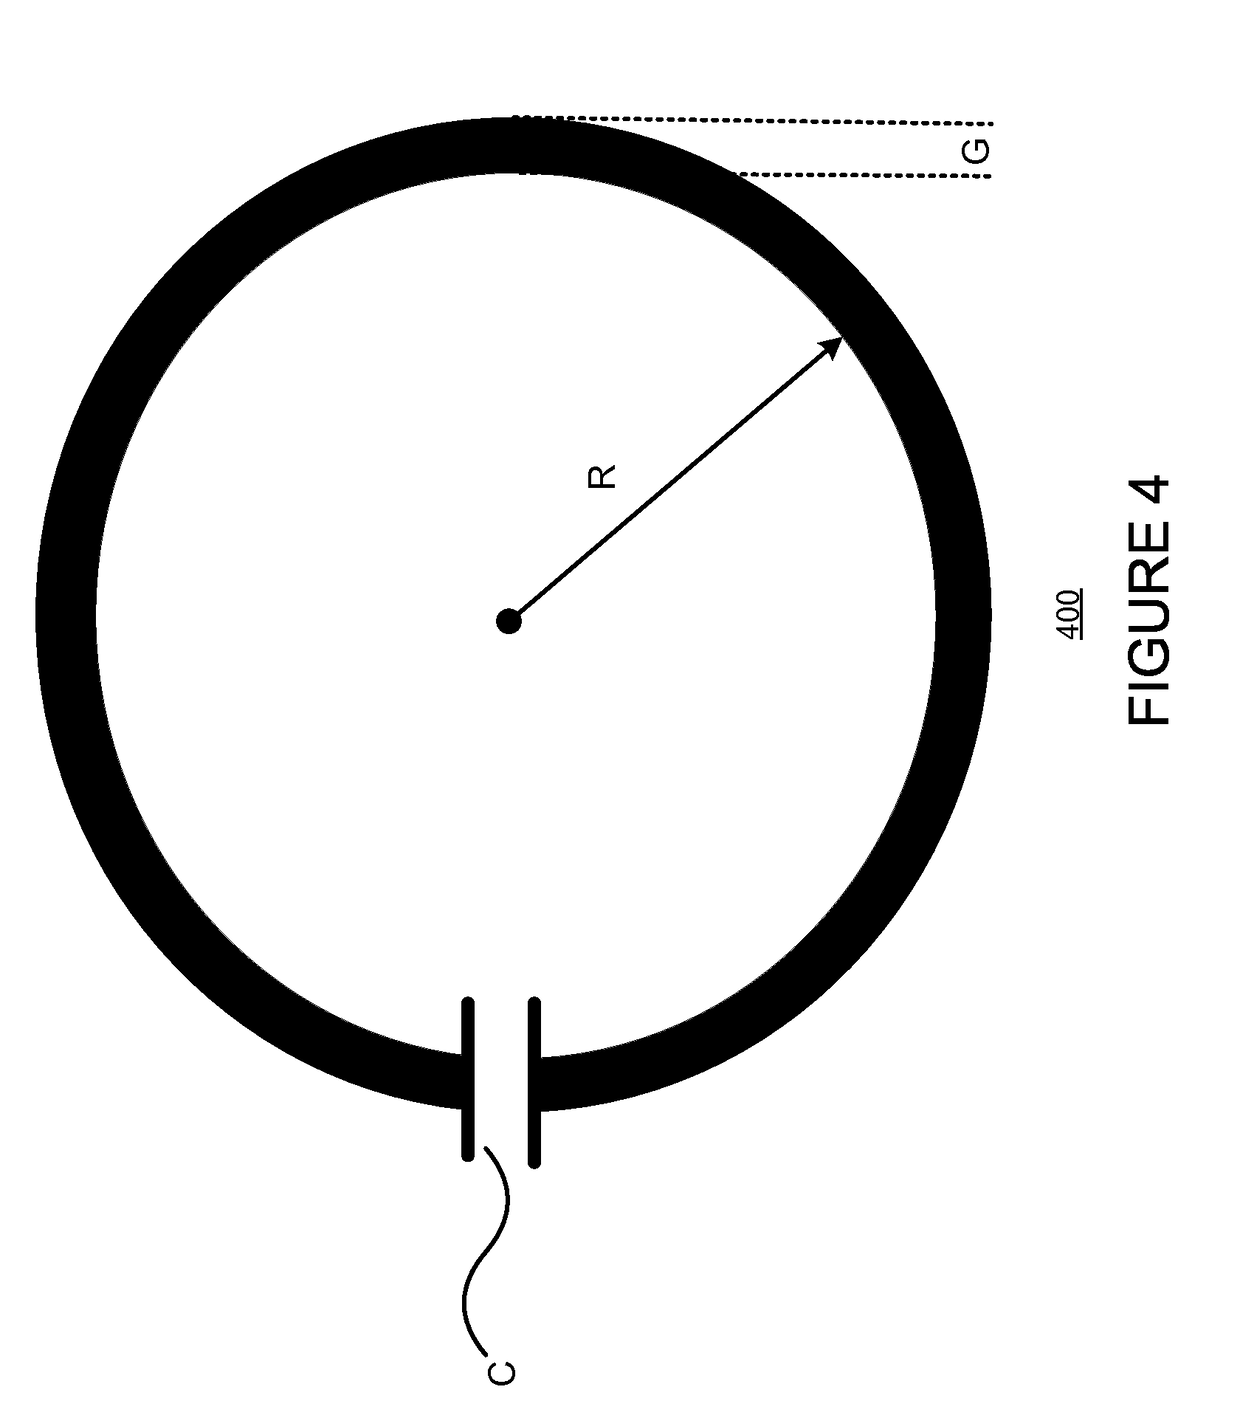 Slotted antenna including an artificial dielectric substrate with embedded periodic conducting rings, for achieving an ideally-uniform, hemispherical radiation/reception when used as a single antenna element, or for azimuth(φ)-independent impedance-matched electronic beam scanning when used as a large antenna array